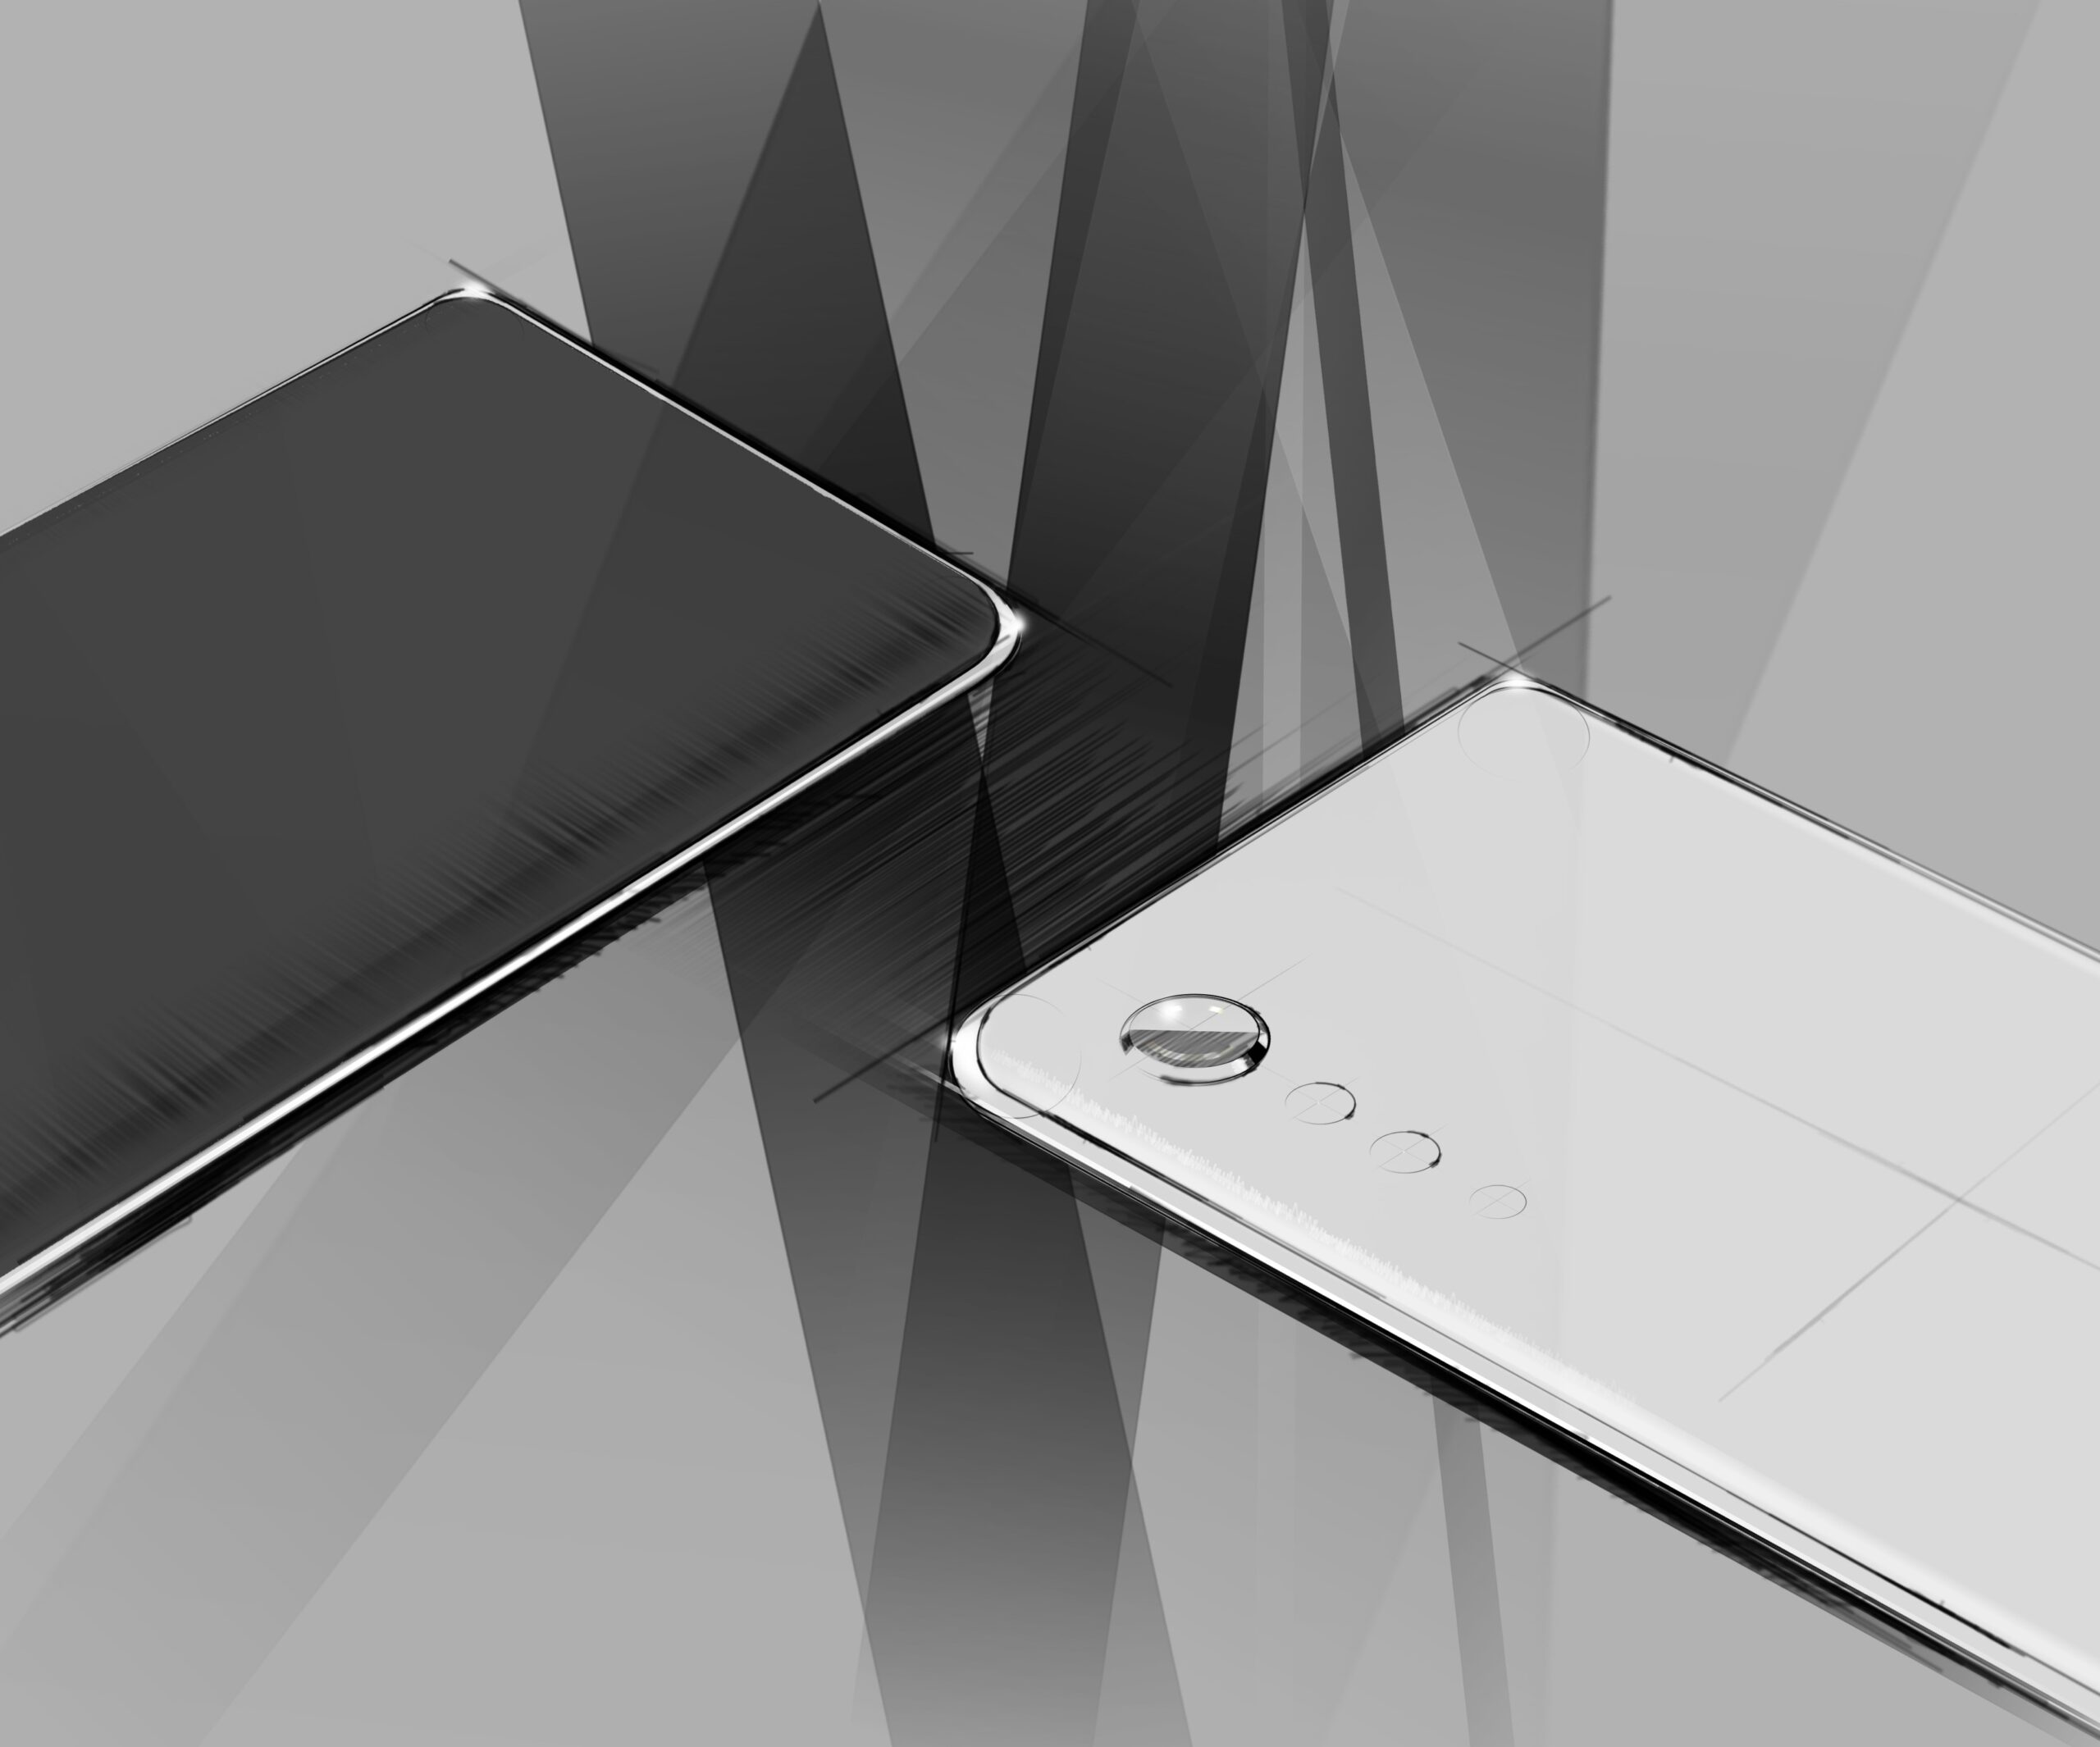 Render image of LG’s upcoming flagship smartphone in black and white